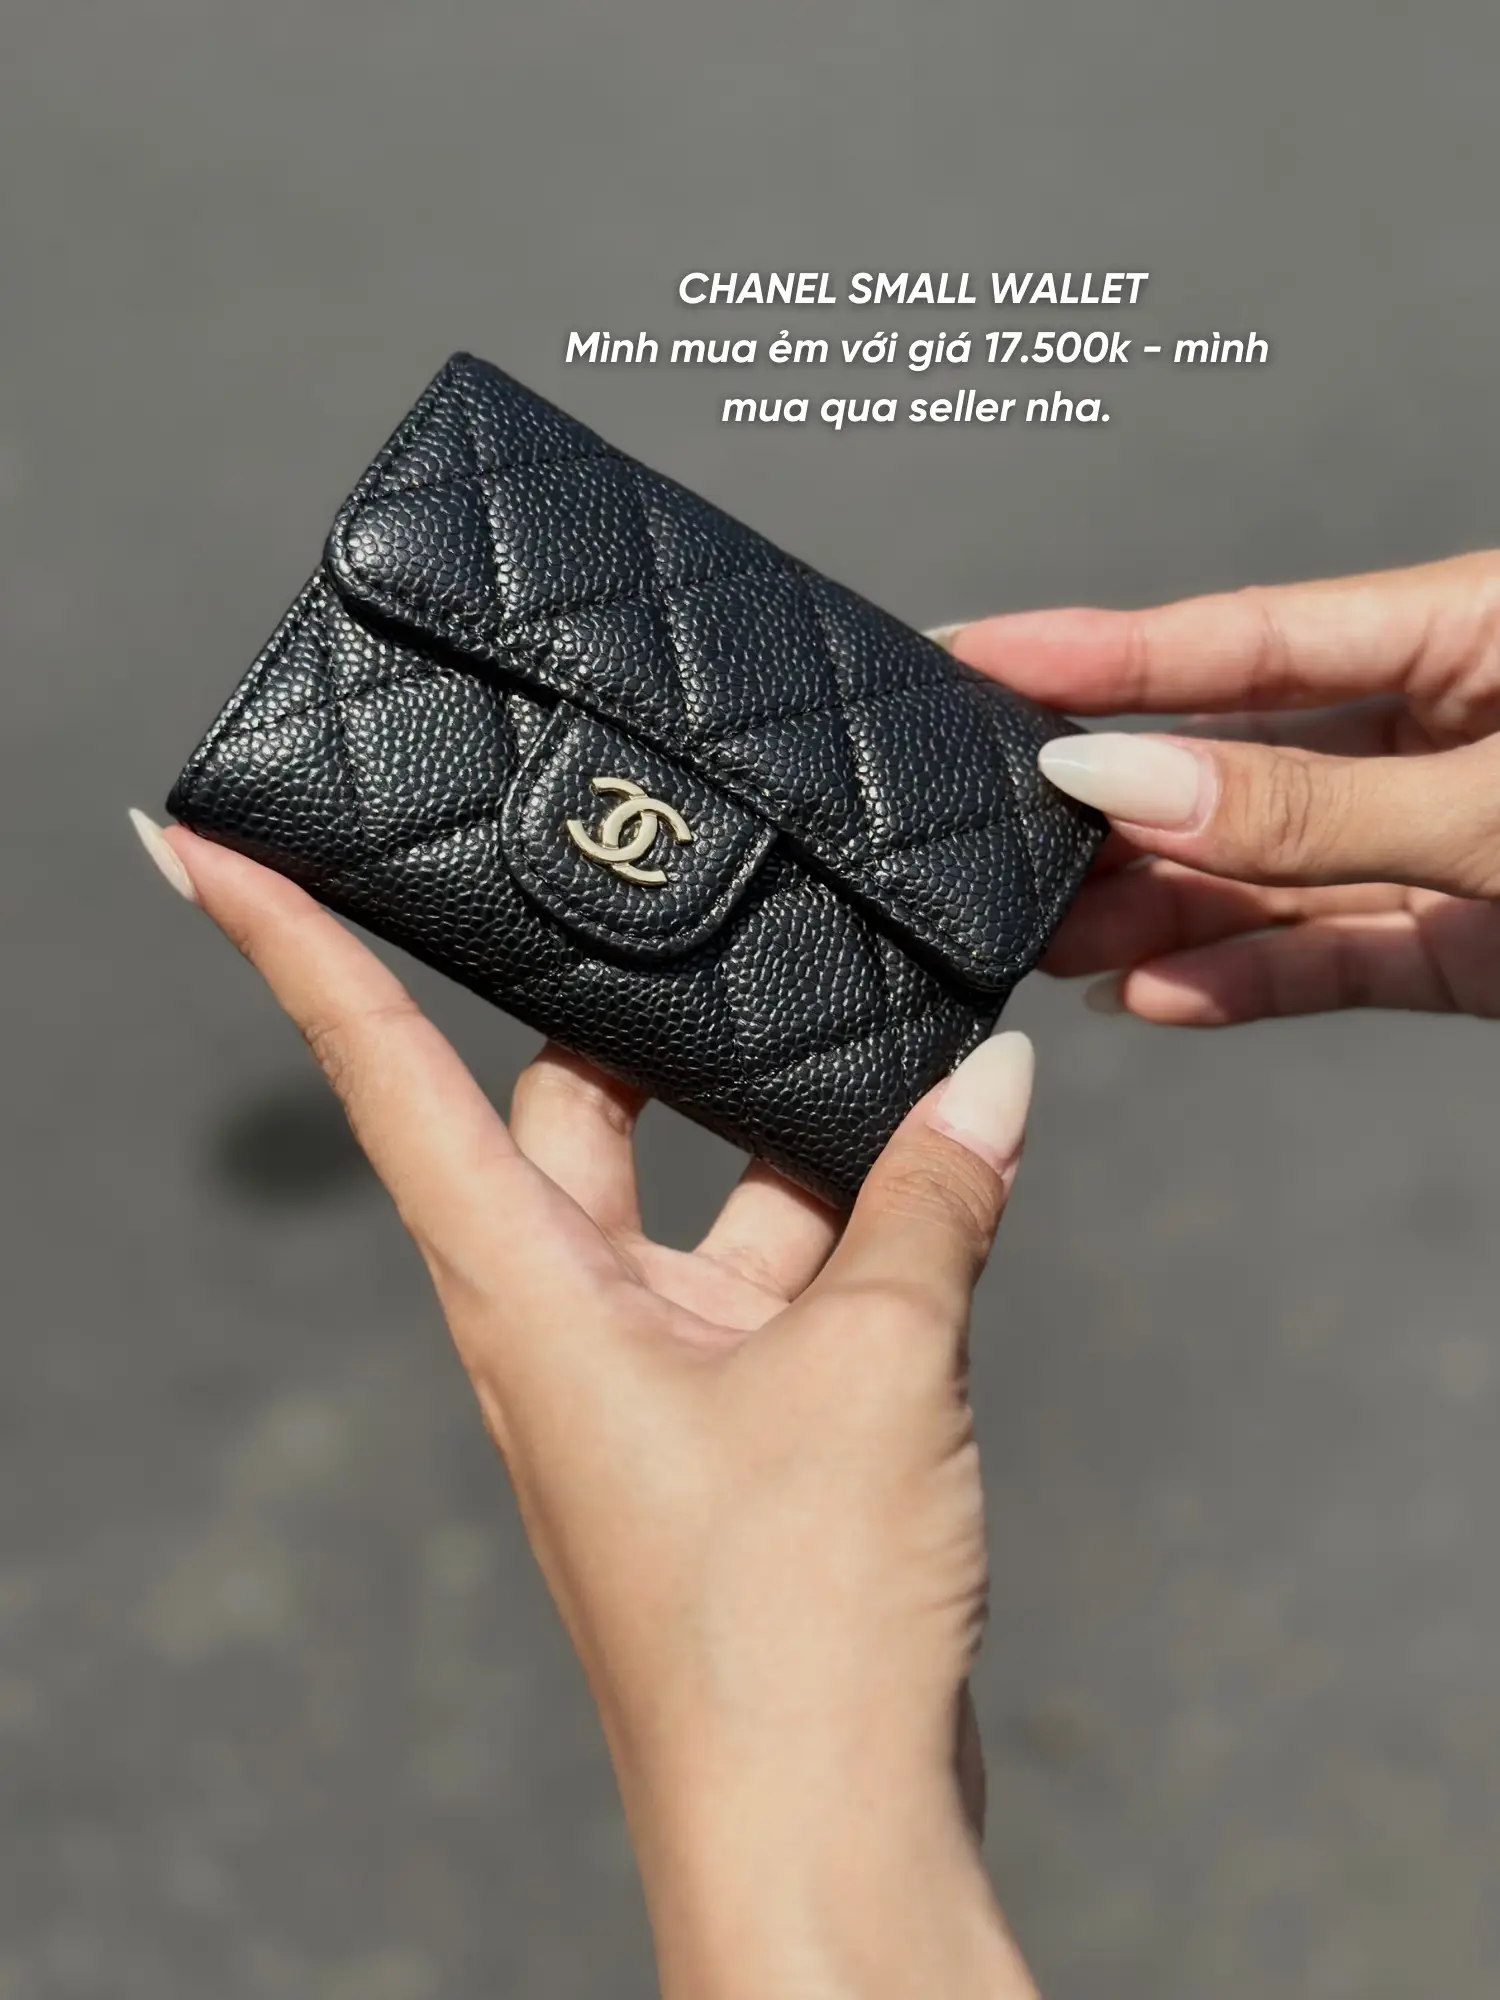 REVIEW CHANEL CLASSIC CARD HOLDER, Gallery posted by Ngọc Lenn